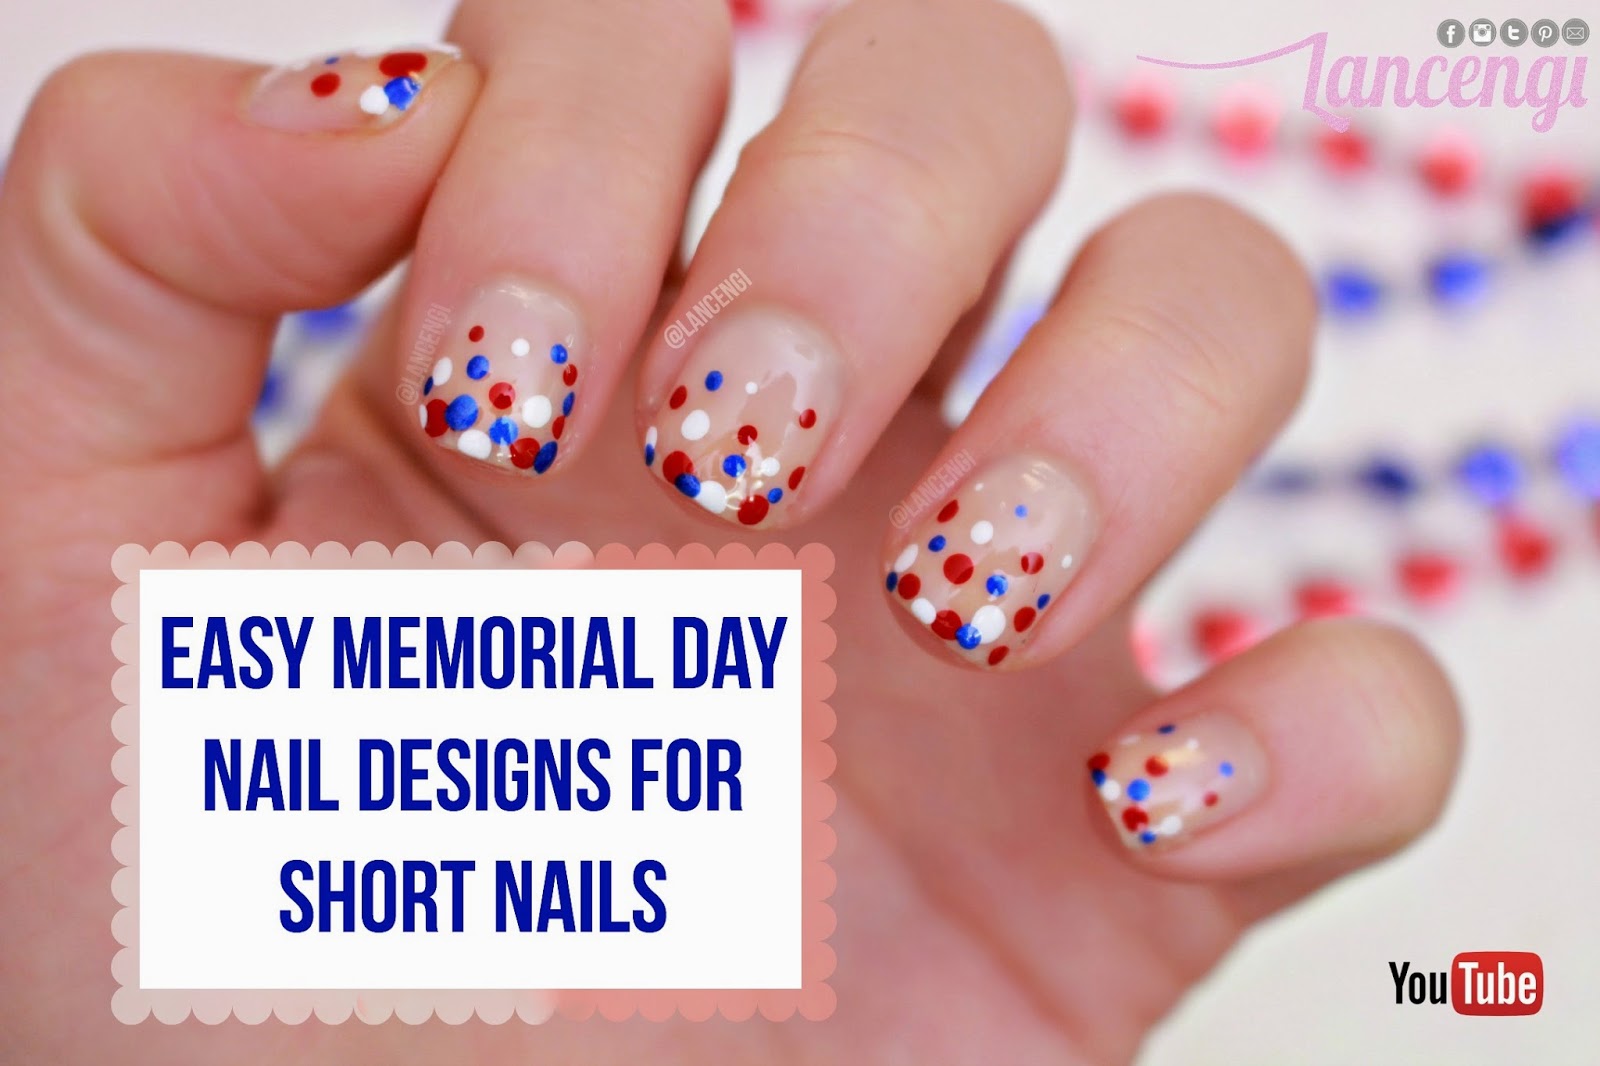 Red, White, and Blue Nail Designs for Memorial Day - wide 2